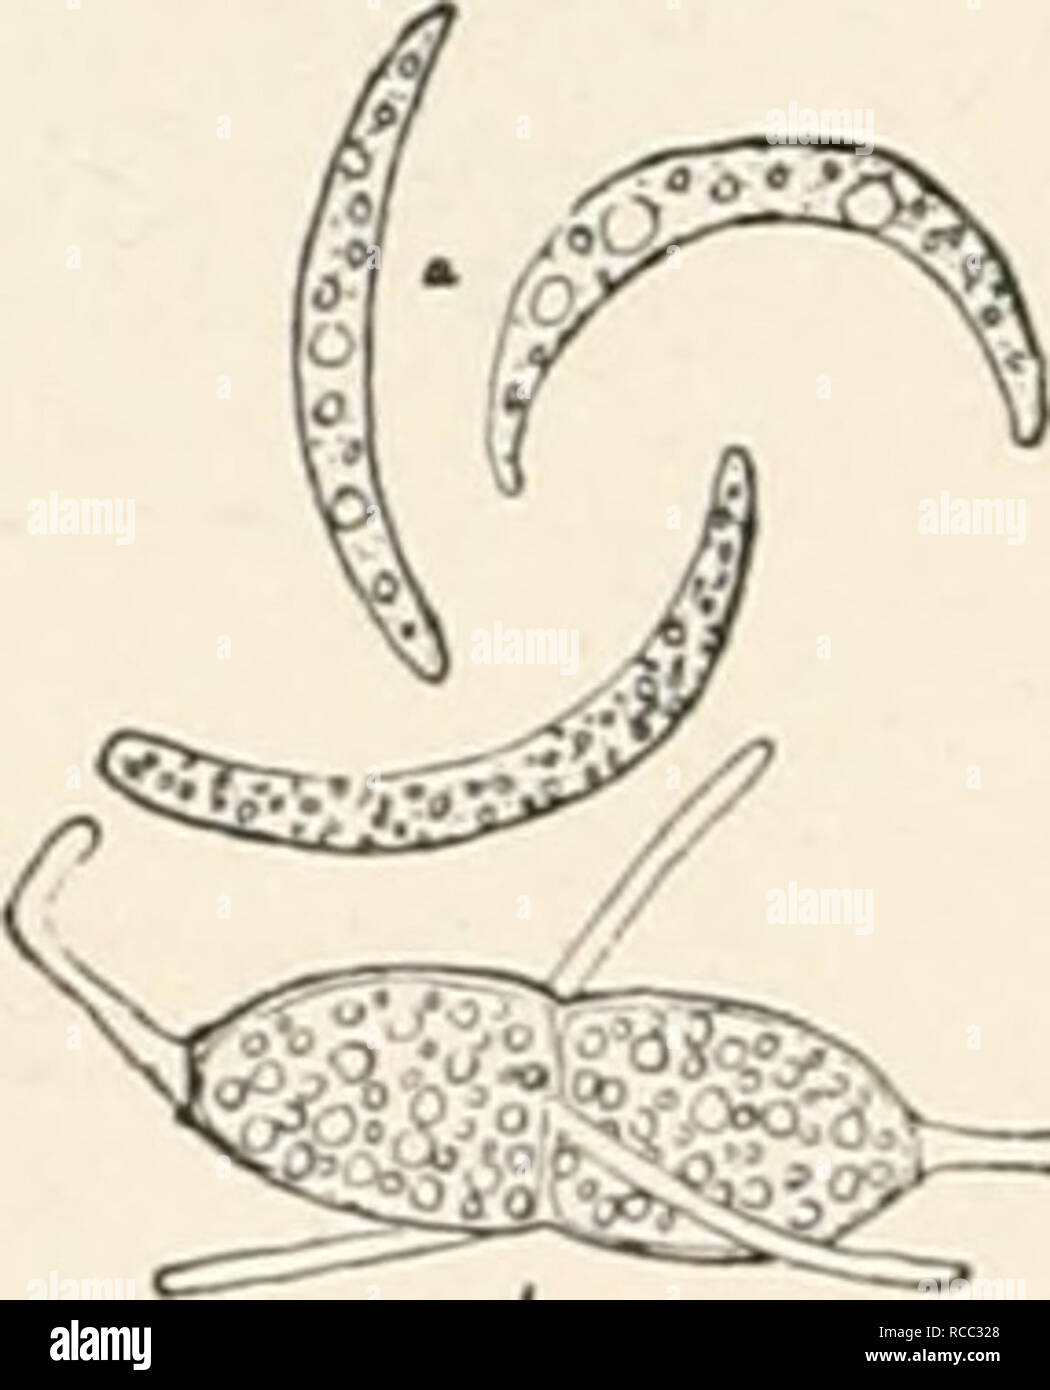 . Diseases of plants induced by cryptogamuc parasites; introduction to the study of pathogenic fungi, slime-fungi, bacteria, and algae. English ed. by William G. Smith. Plant diseases; Parasitic plants. Fig. 112.—Section of stroma oi Aglaospora. a, Boundary of stroma formed of dark brown fungus - mycelium; 6, sclerenchyma-strand of the cortex ; c, conidial cushion ; d, union of necks of two perithecia. (After Hartig.). Fig. 113.—a, Conidia ; h, asco- spore of Aglaospora toJ.eolo. ( X -^f^). (After Hartig.) superficially abjointed from the stromata; while embedded in it are groups of perithecia Stock Photo